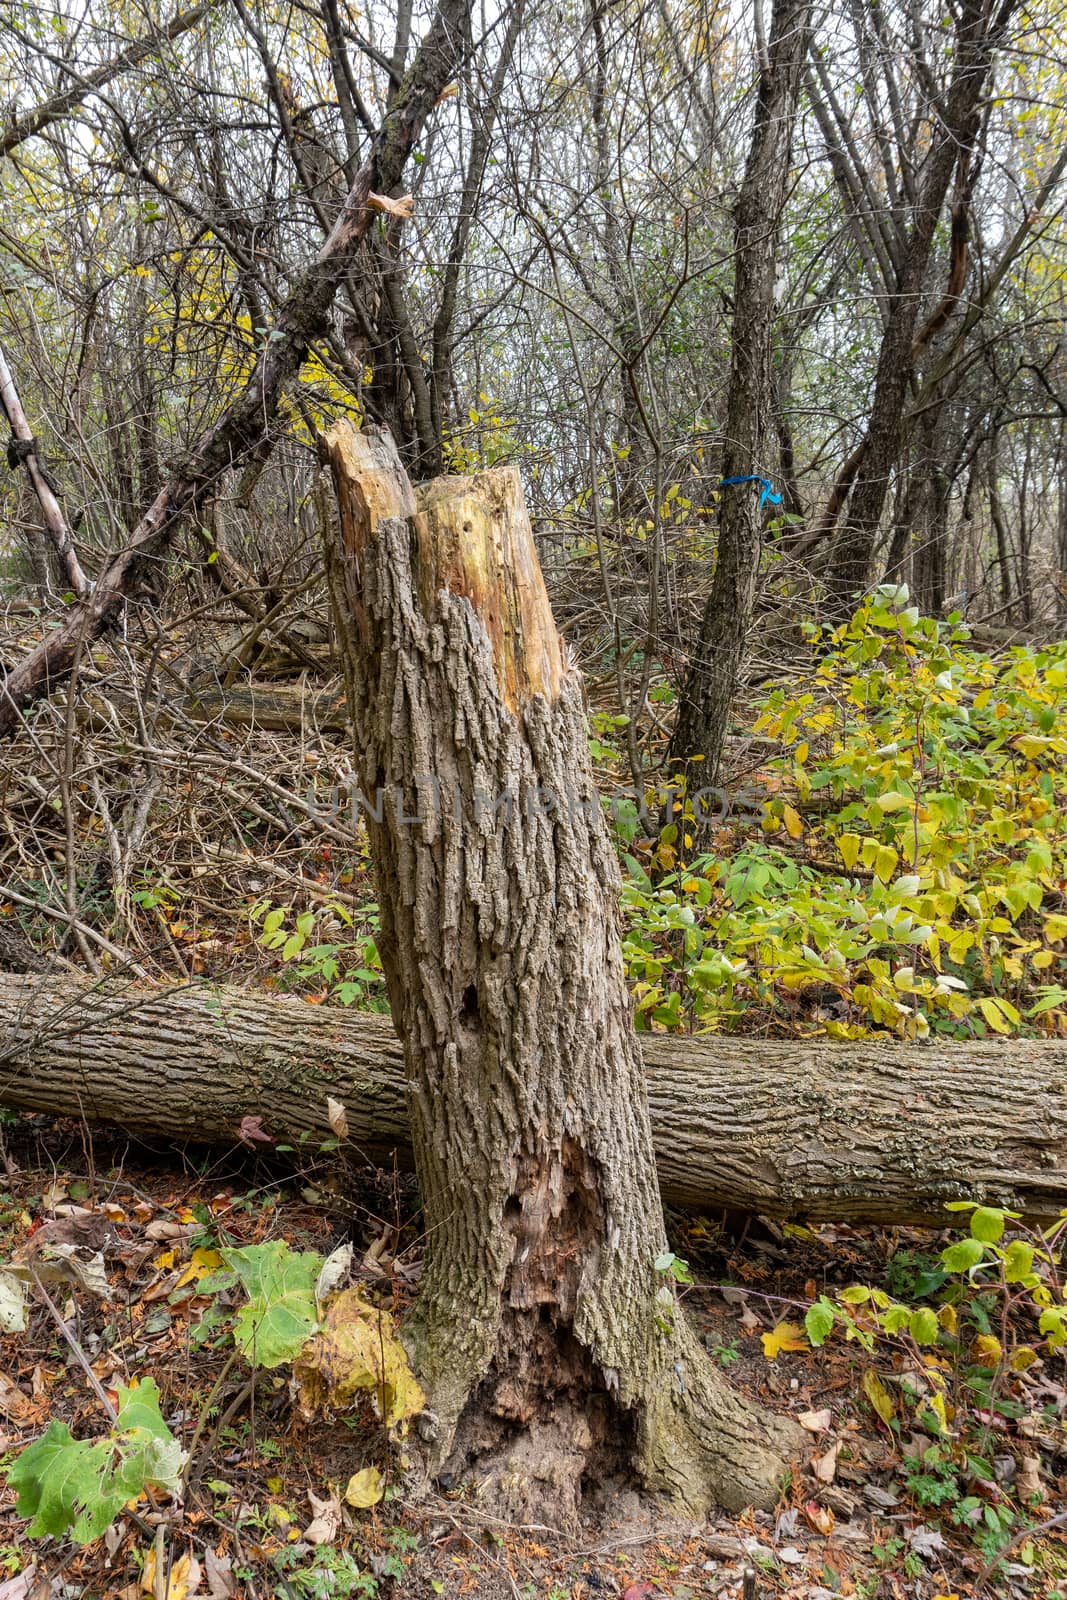 A broken tree and a rotting stump nearby is a wildlife. It has its own laws.